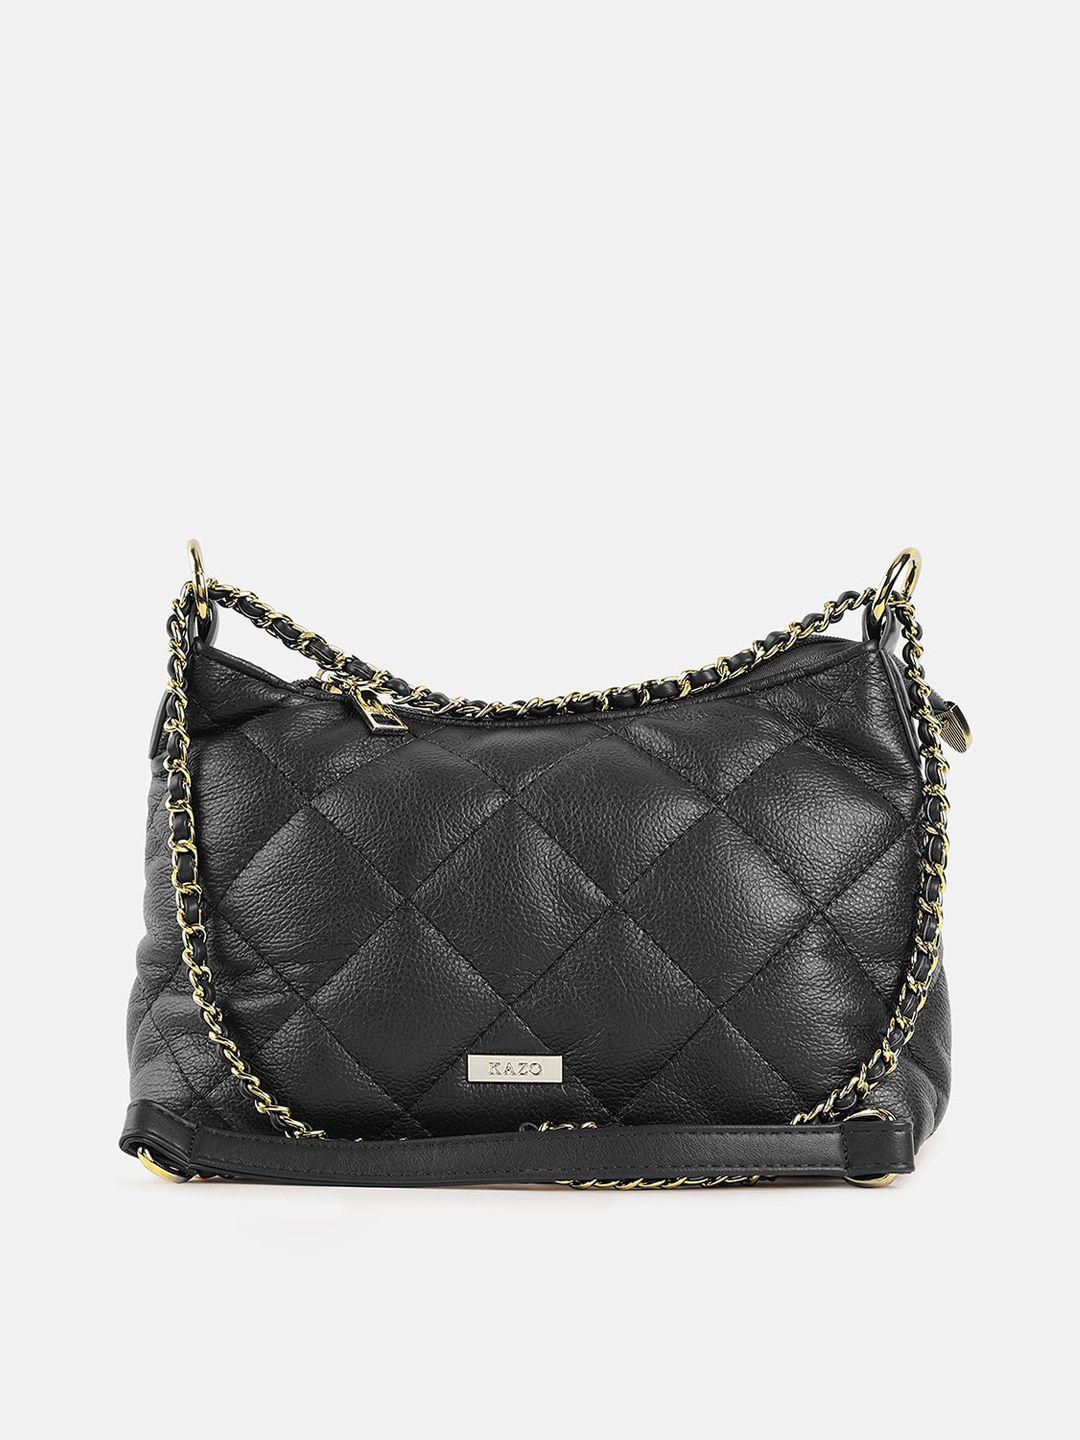 kazo black textured structured sling bag with quilted